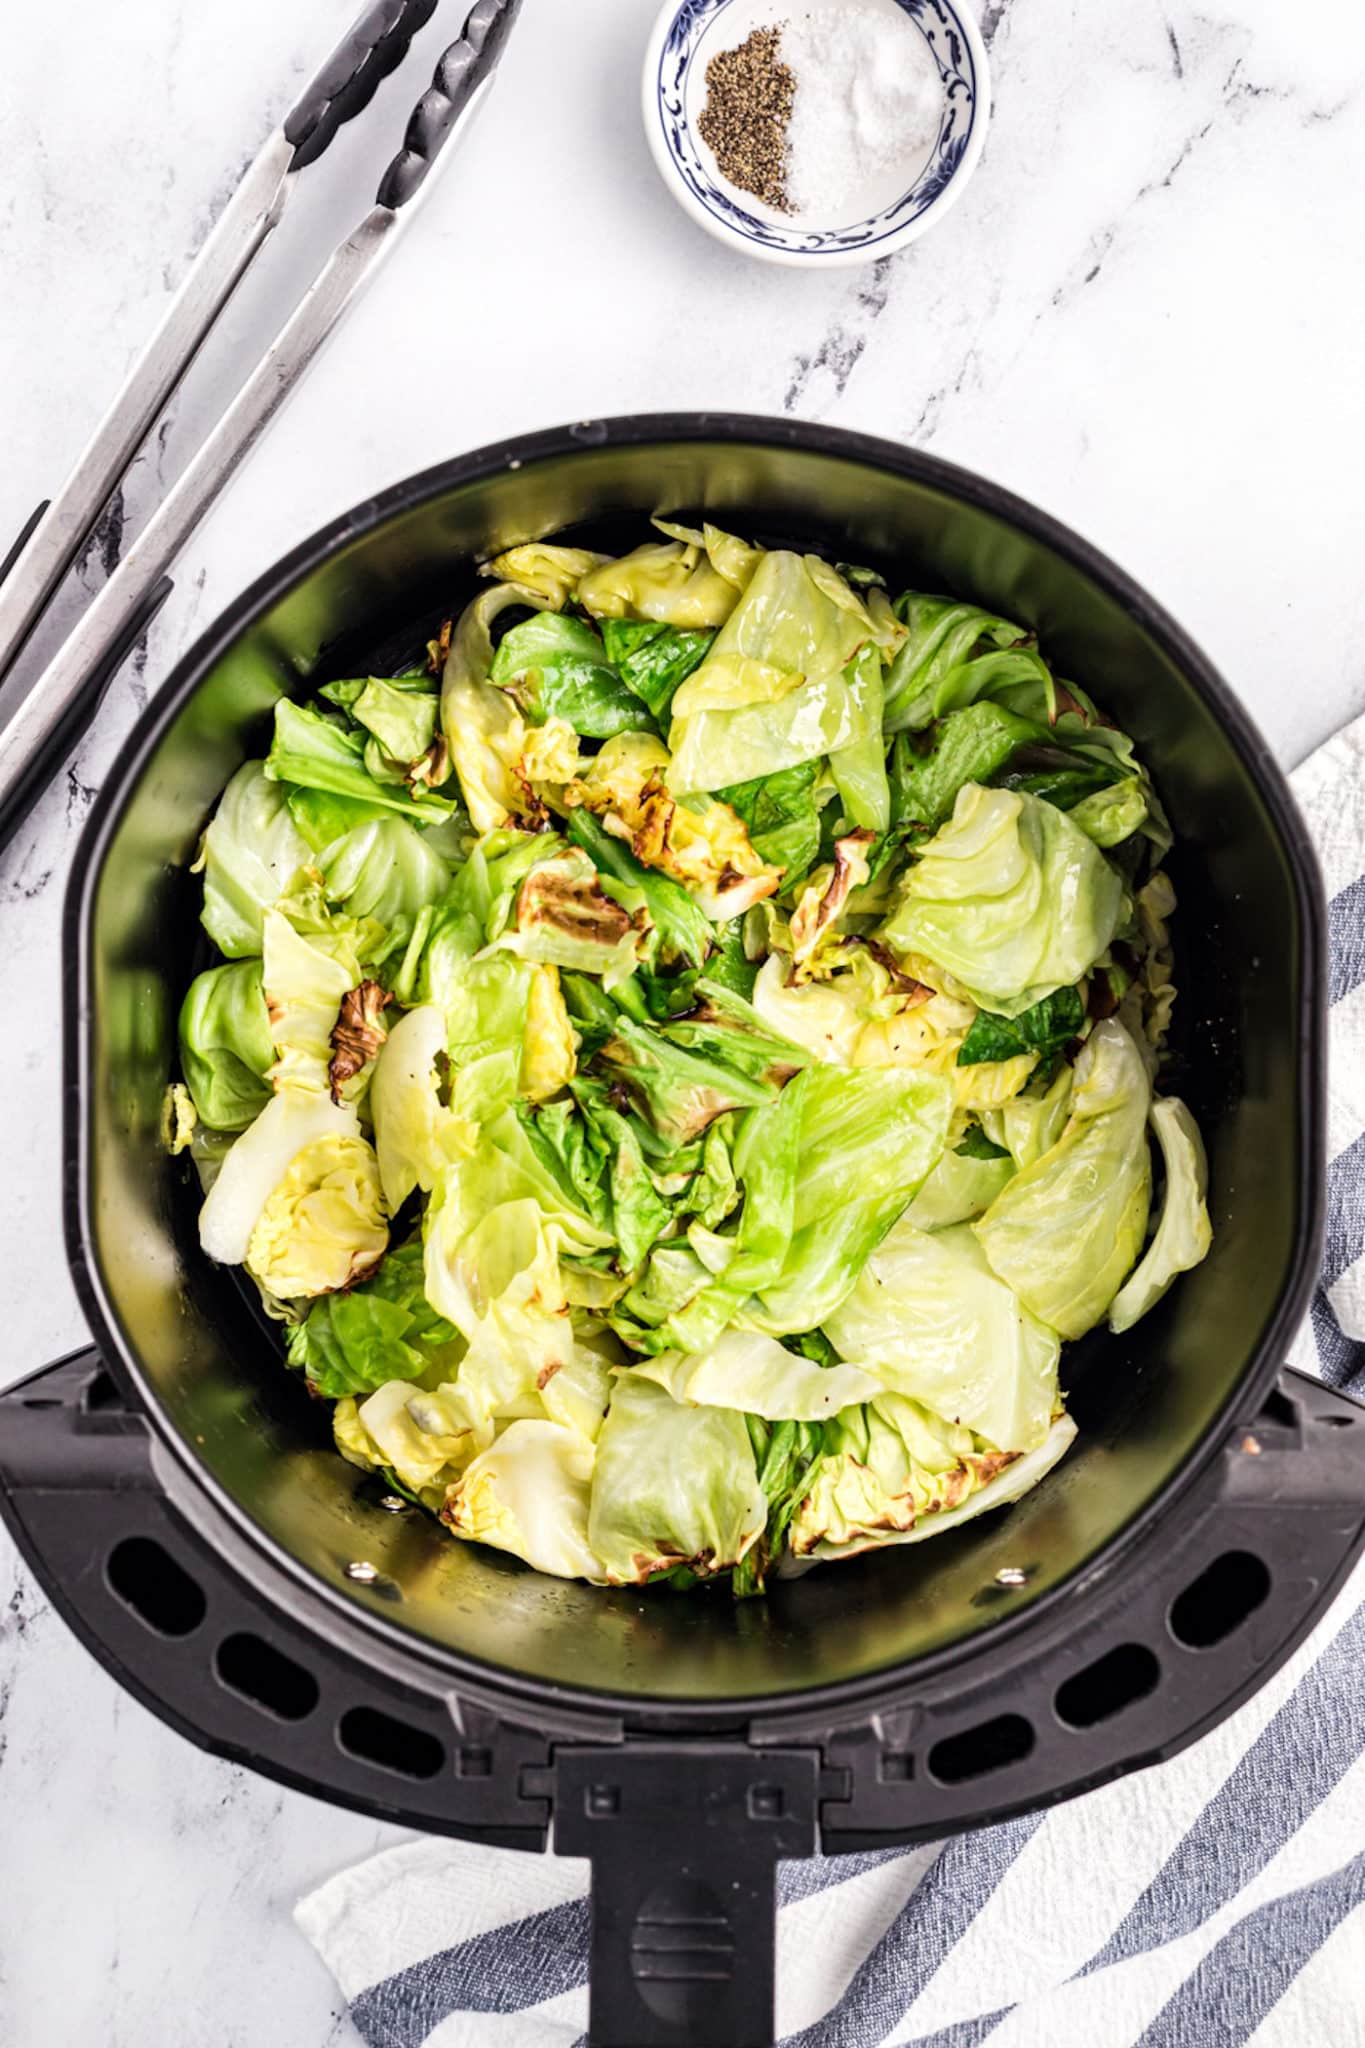 Cooked cabbage in an air fryer basket.